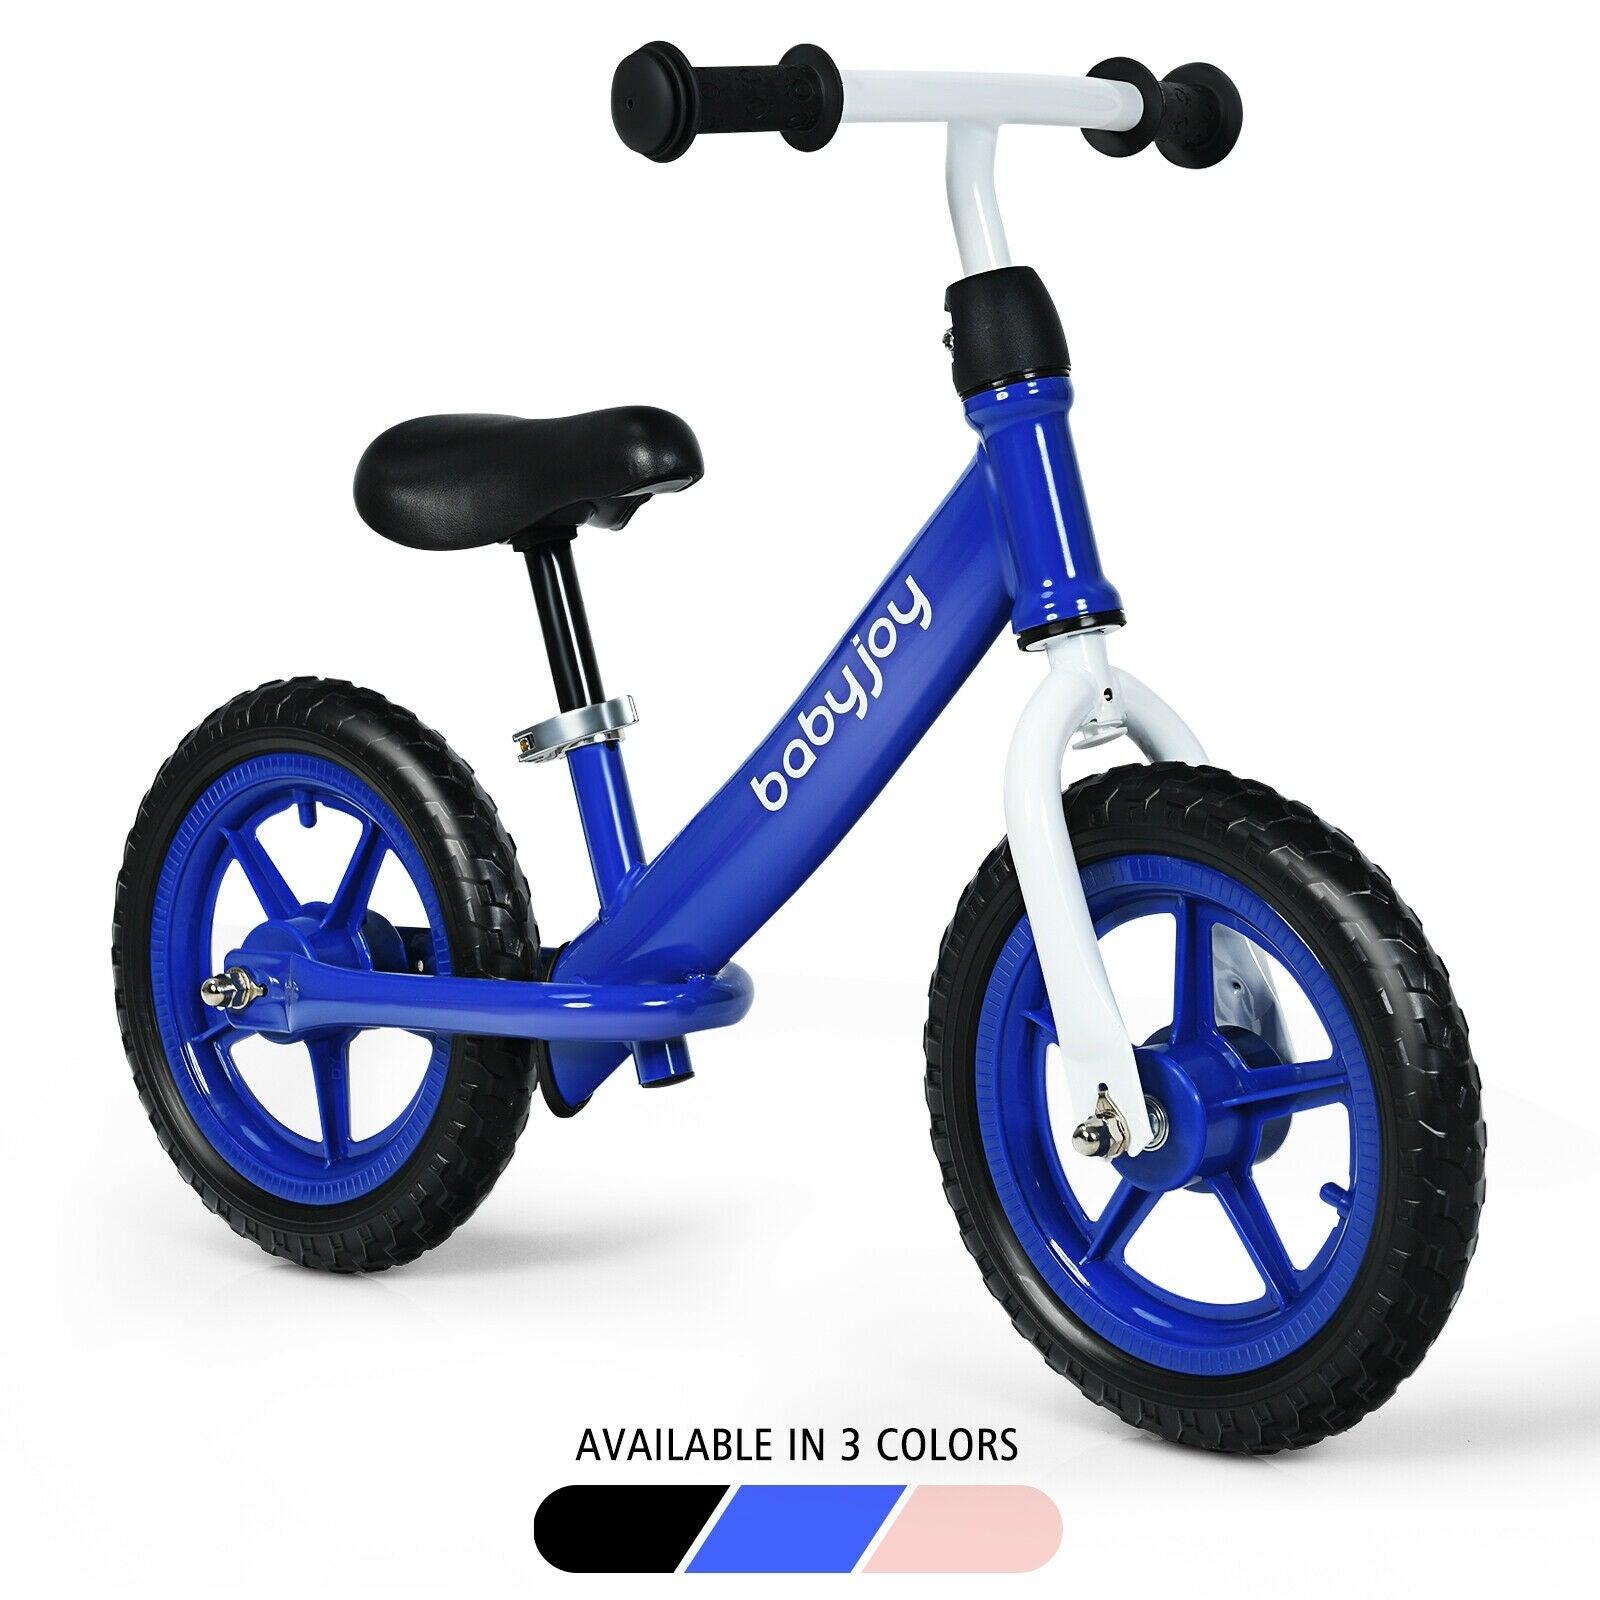 Kids Balance Bike TY327799,No-Pedal Ride Pre Learn with Adjustable Seat,12 Inch